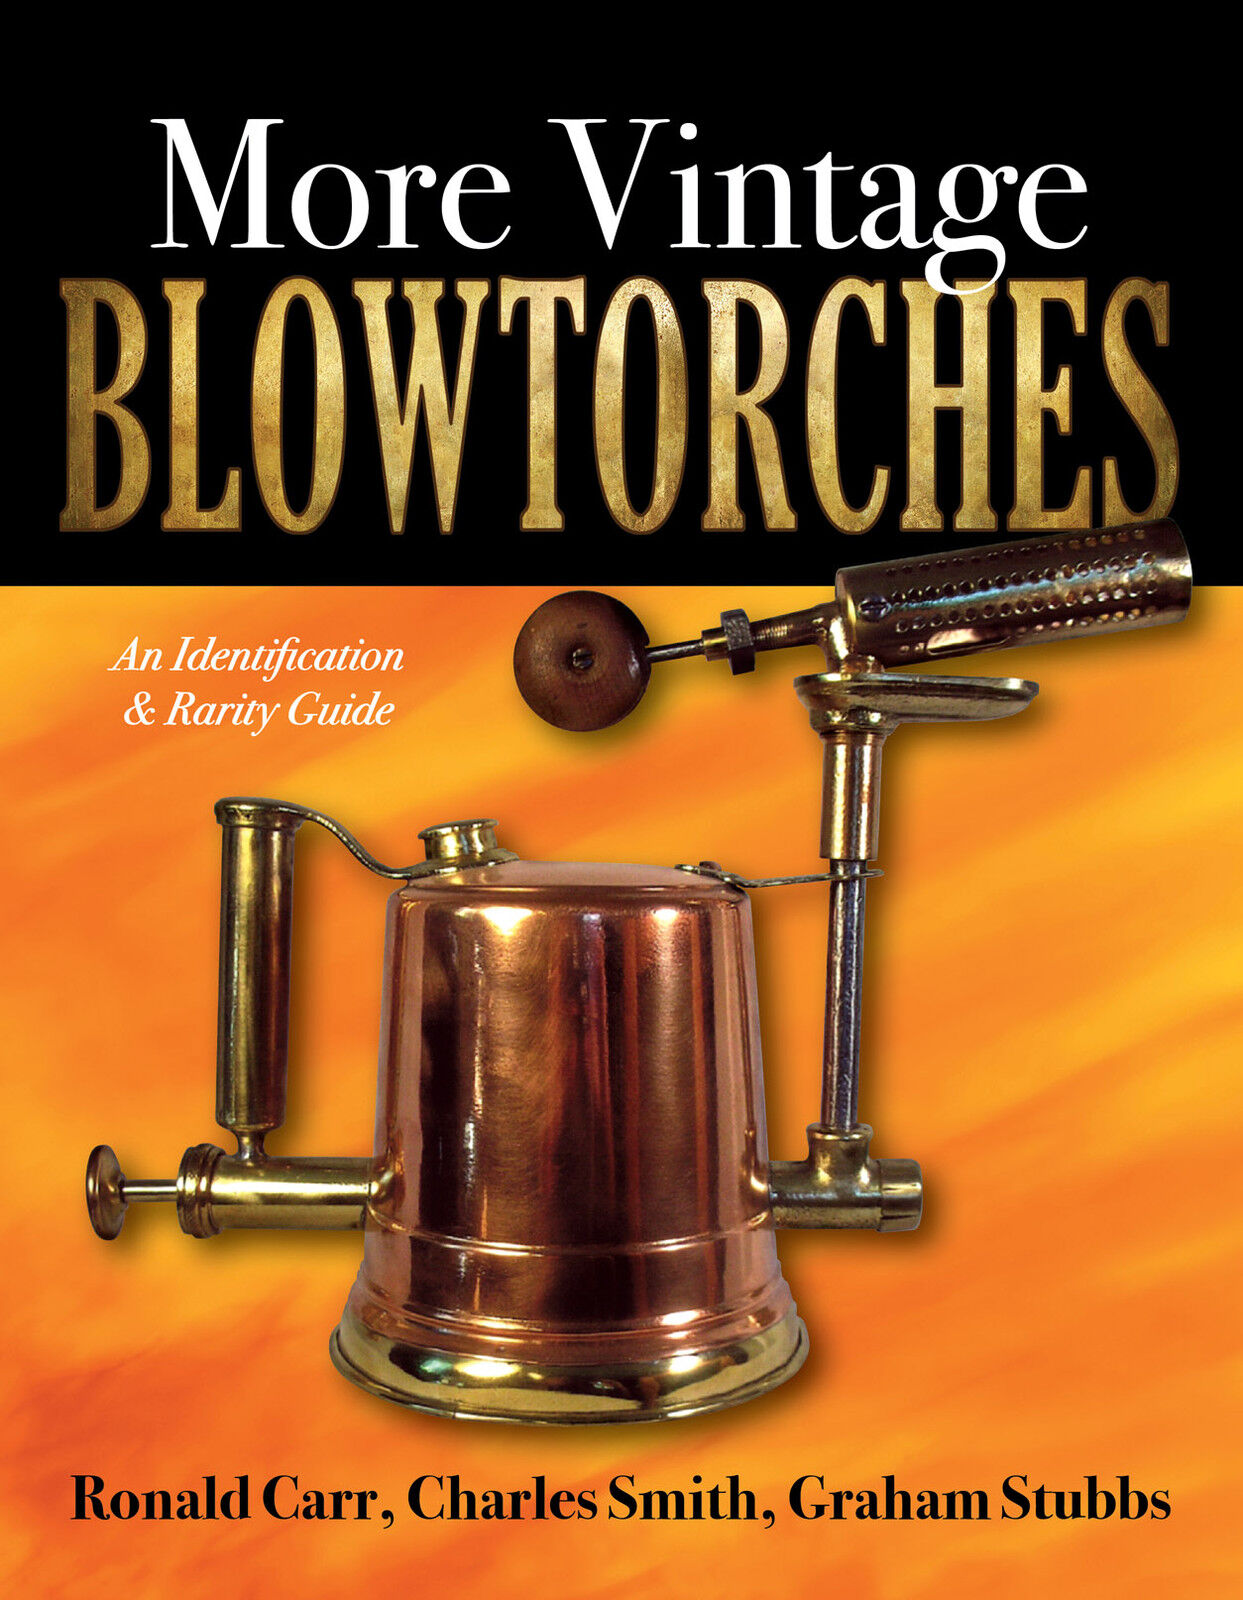 NEW Blow Torch Reference Book MORE VINTAGE BLOWTORCHES, 334 pgs, + Rarity Guide